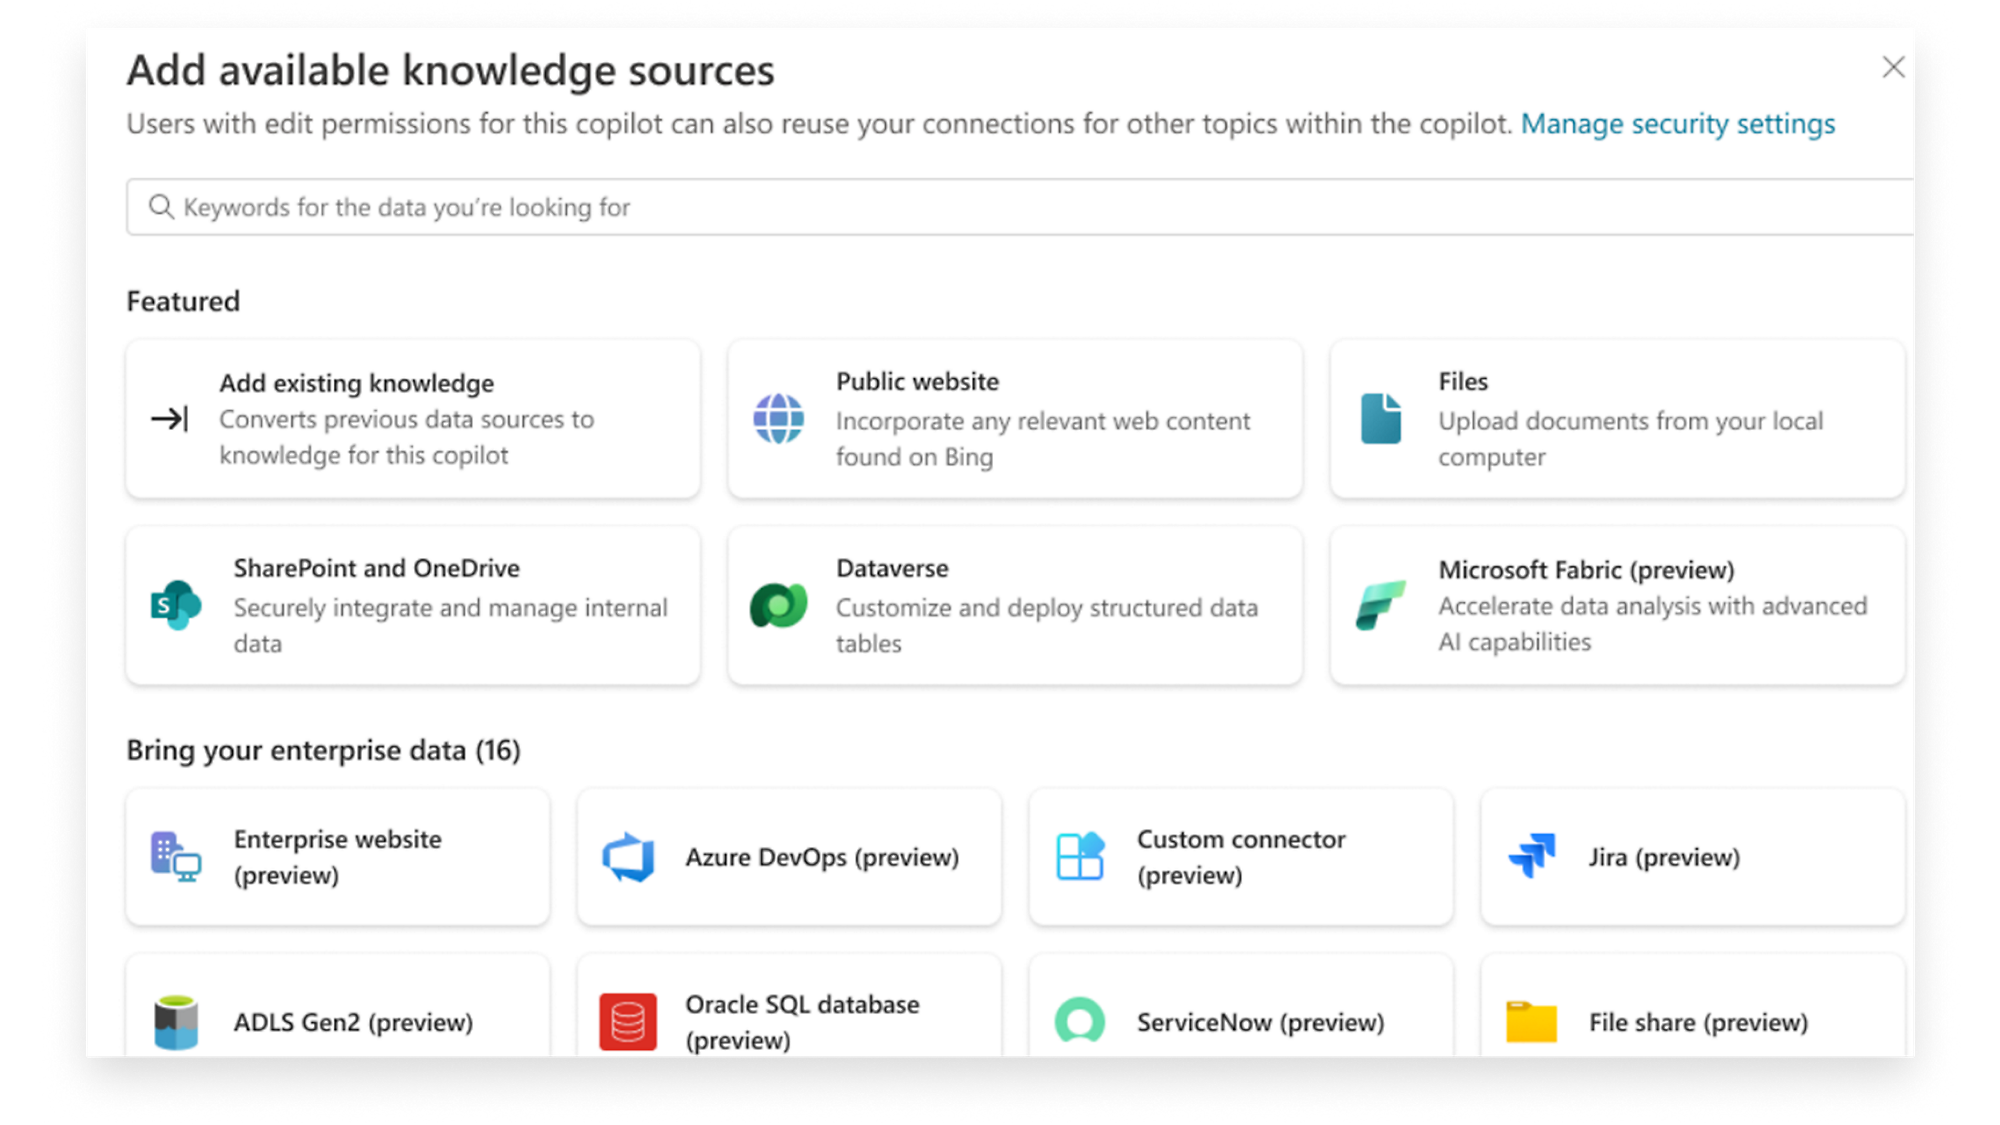 Add knowledge sources, integrate SharePoint, OneDrive, Dataverse, Files, and more for copilot's data enrichment